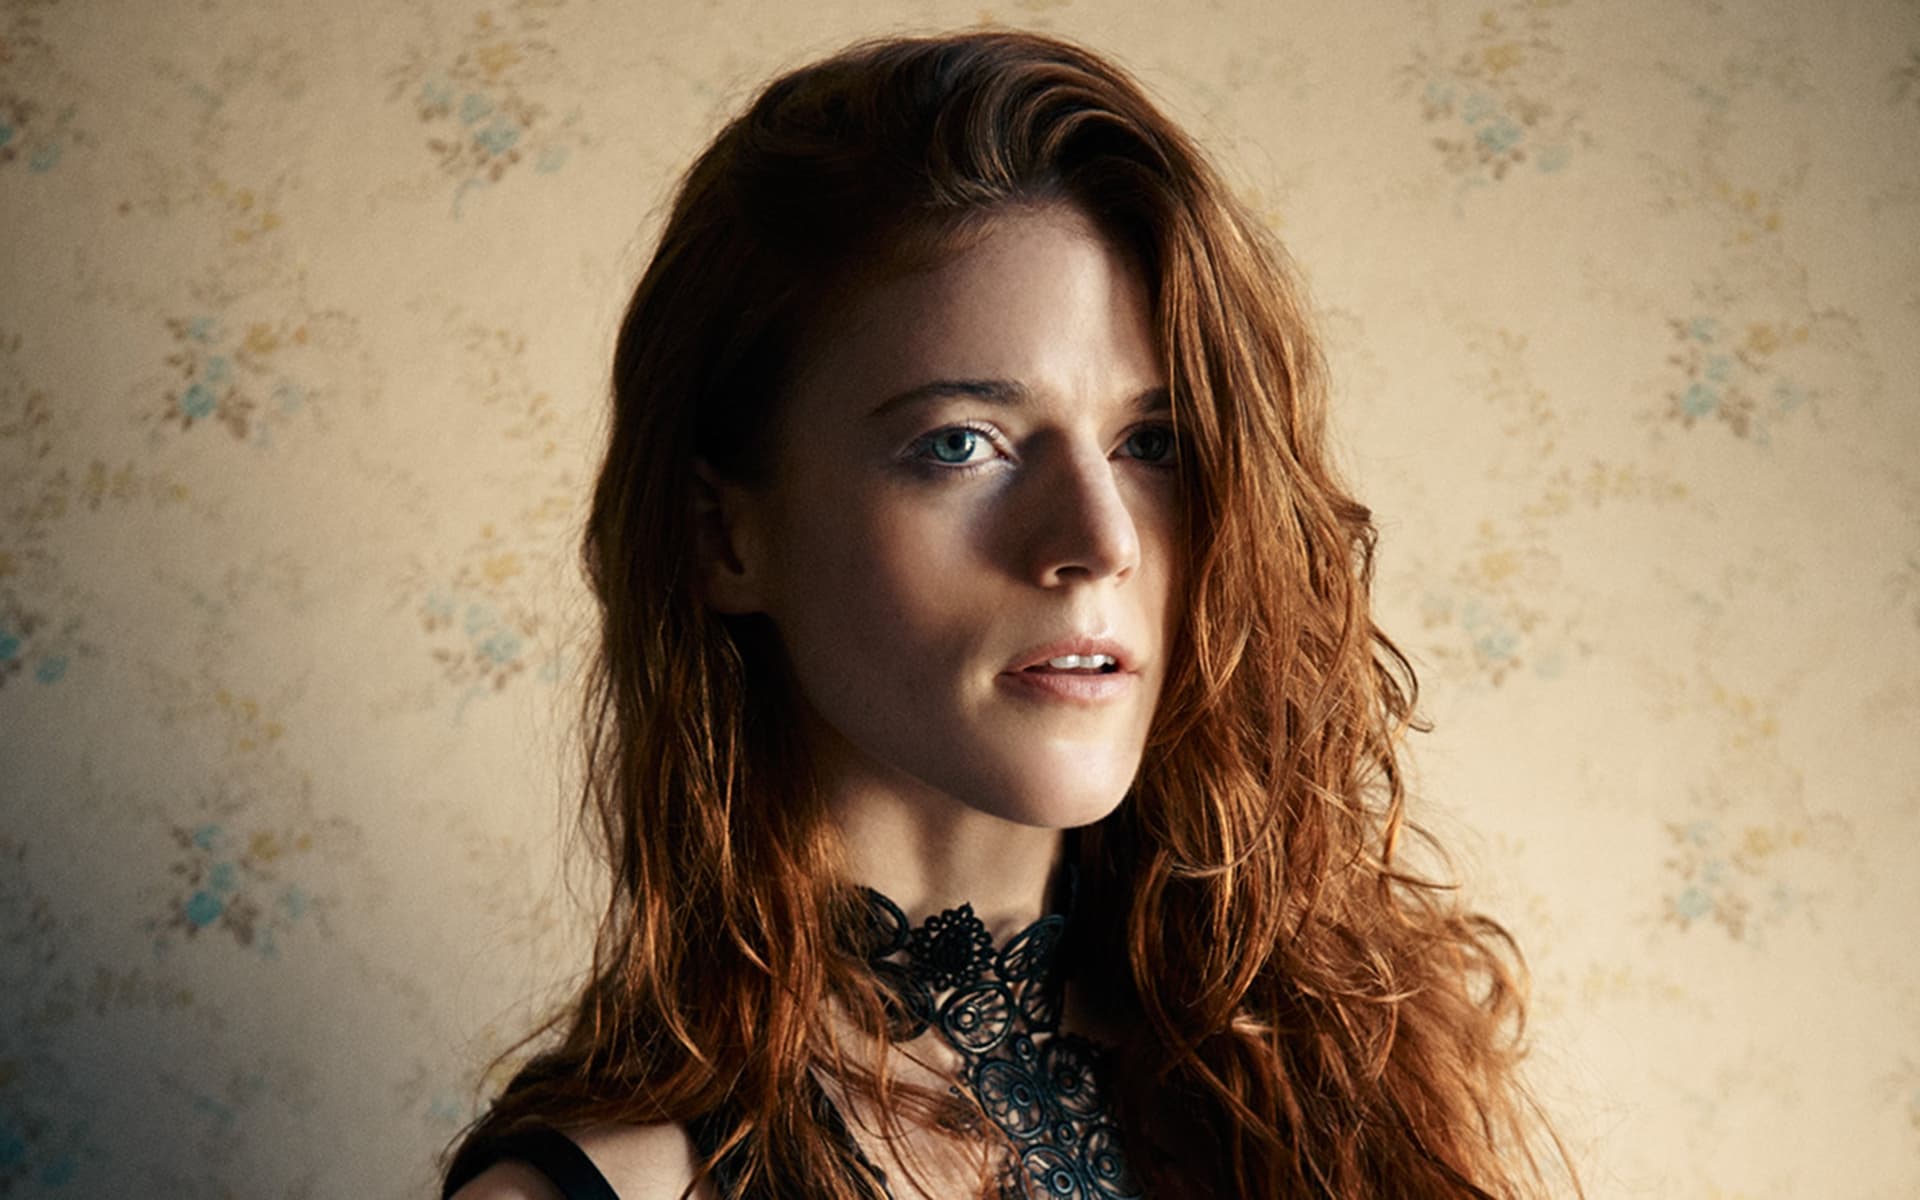 44 Facts About Rose Leslie - Facts.net